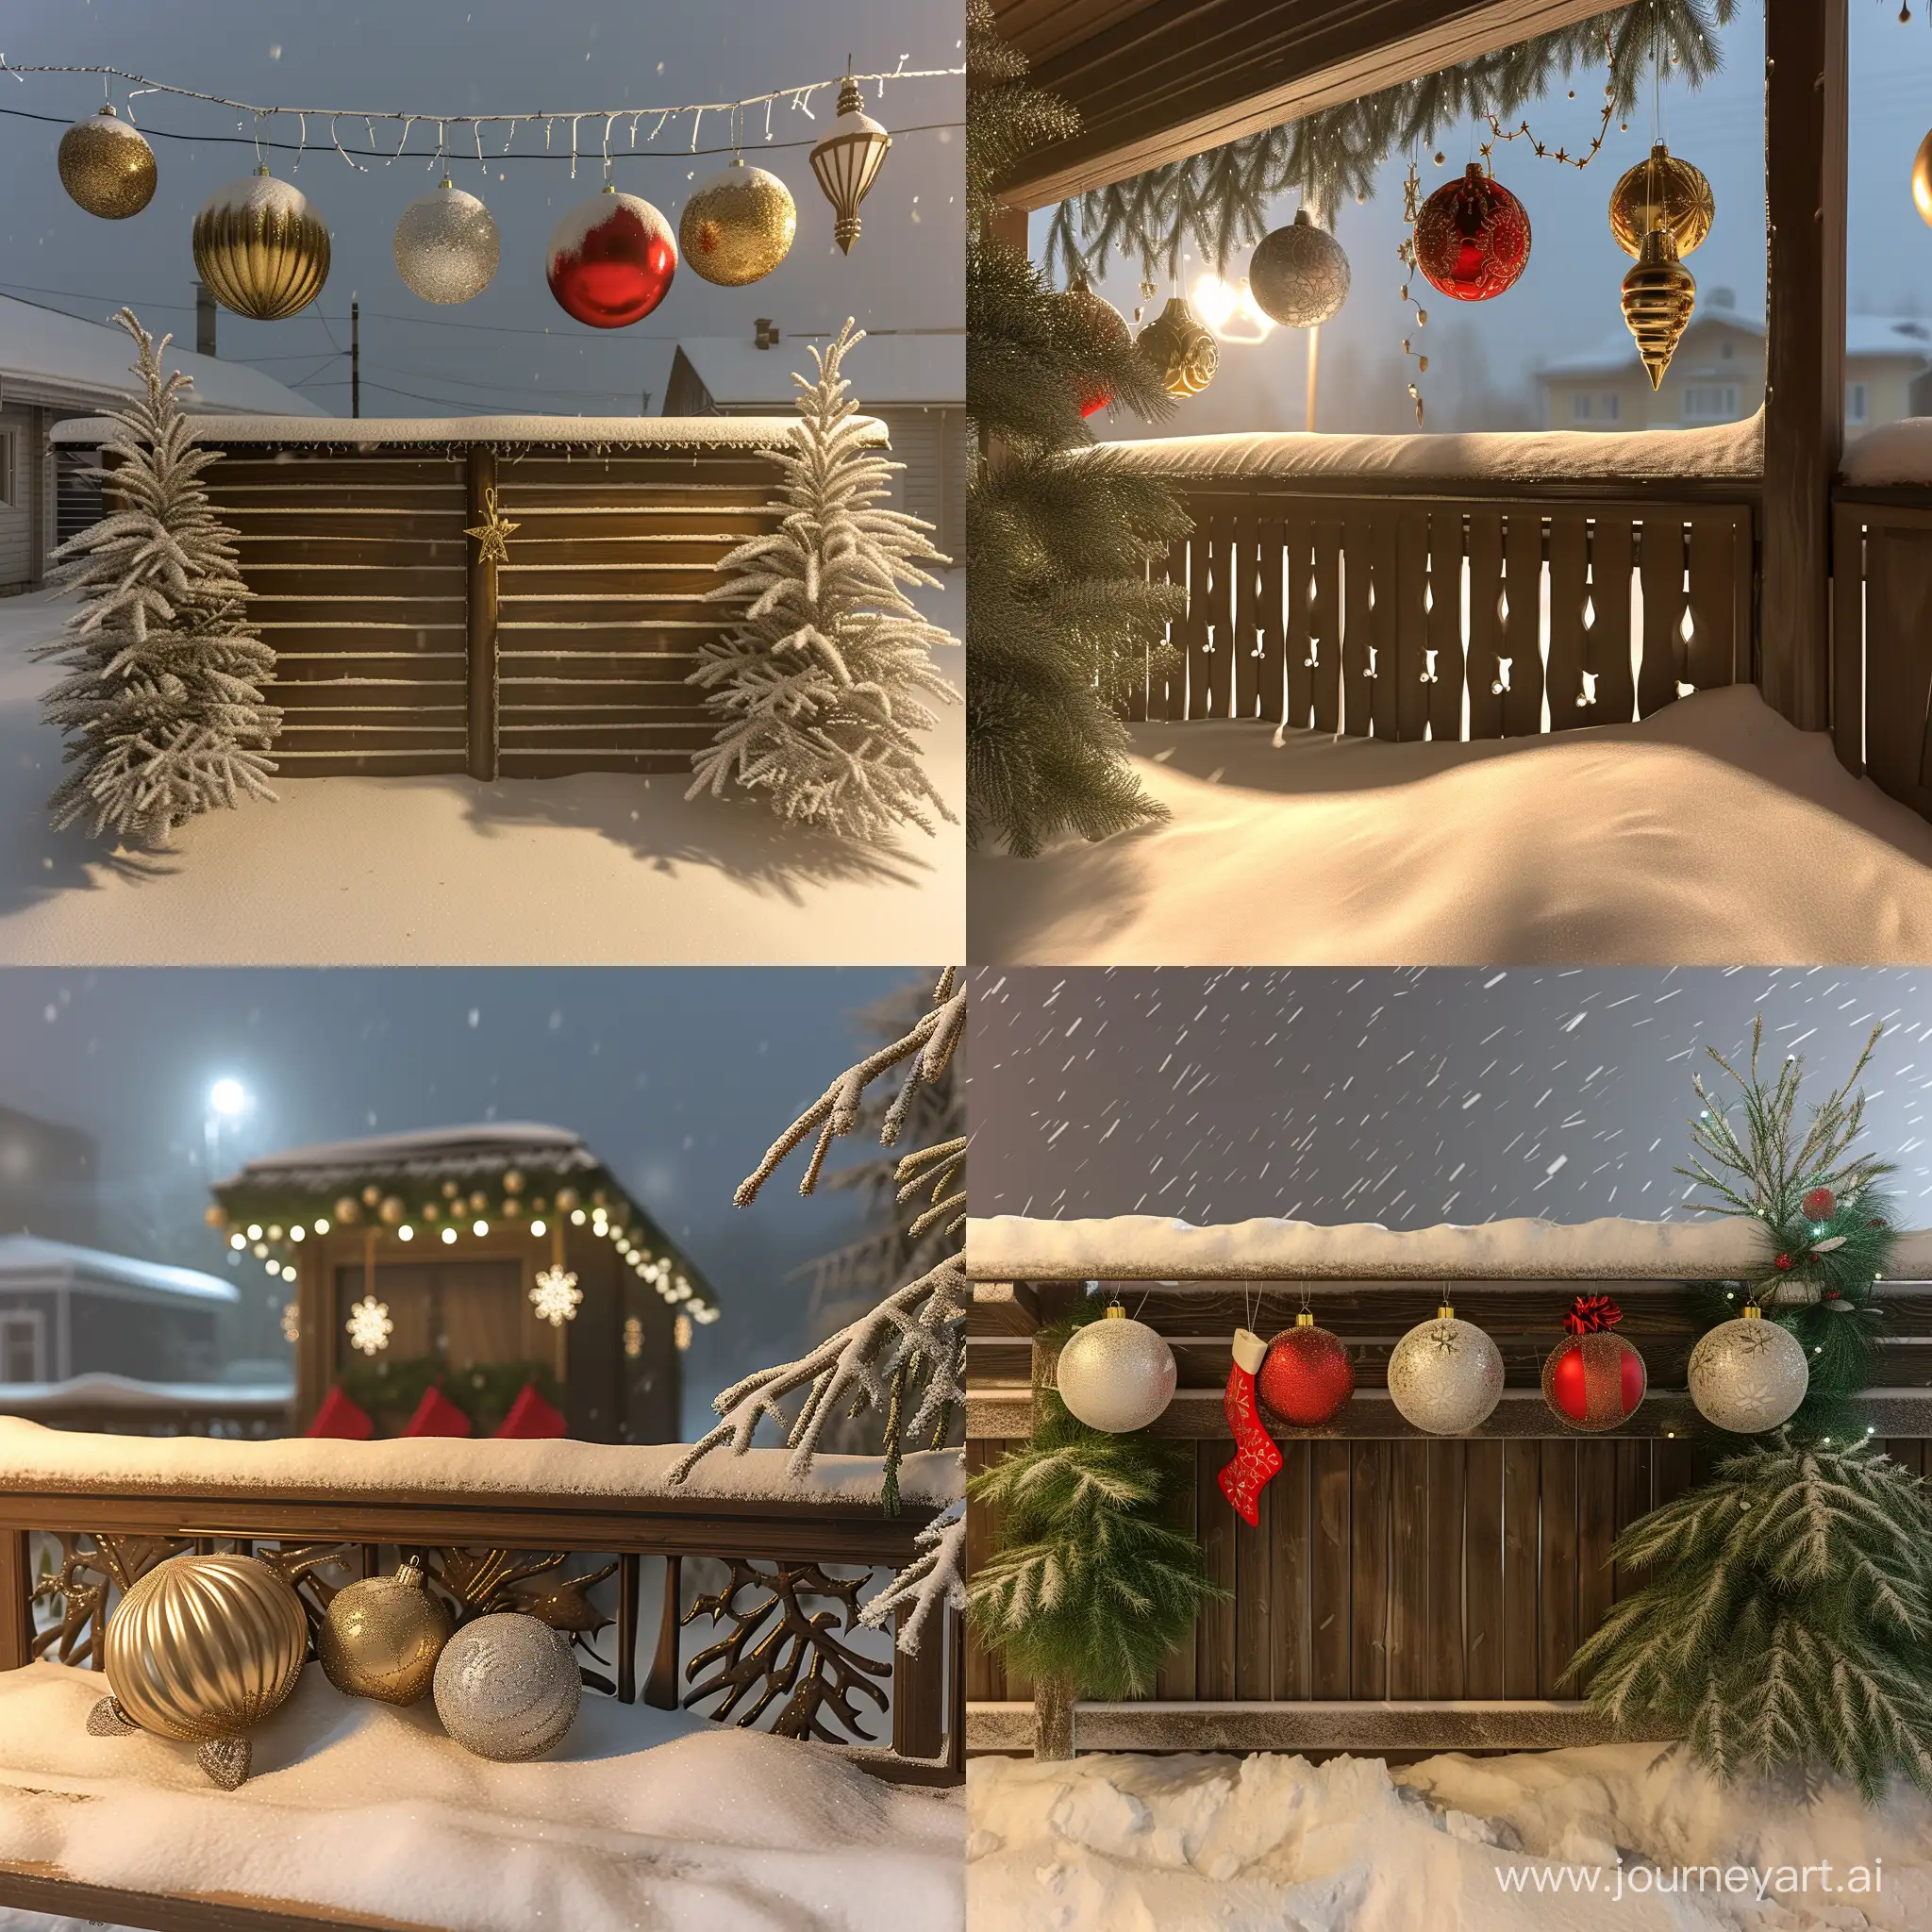 Festive-Christmas-Decorations-in-3D-Perspective